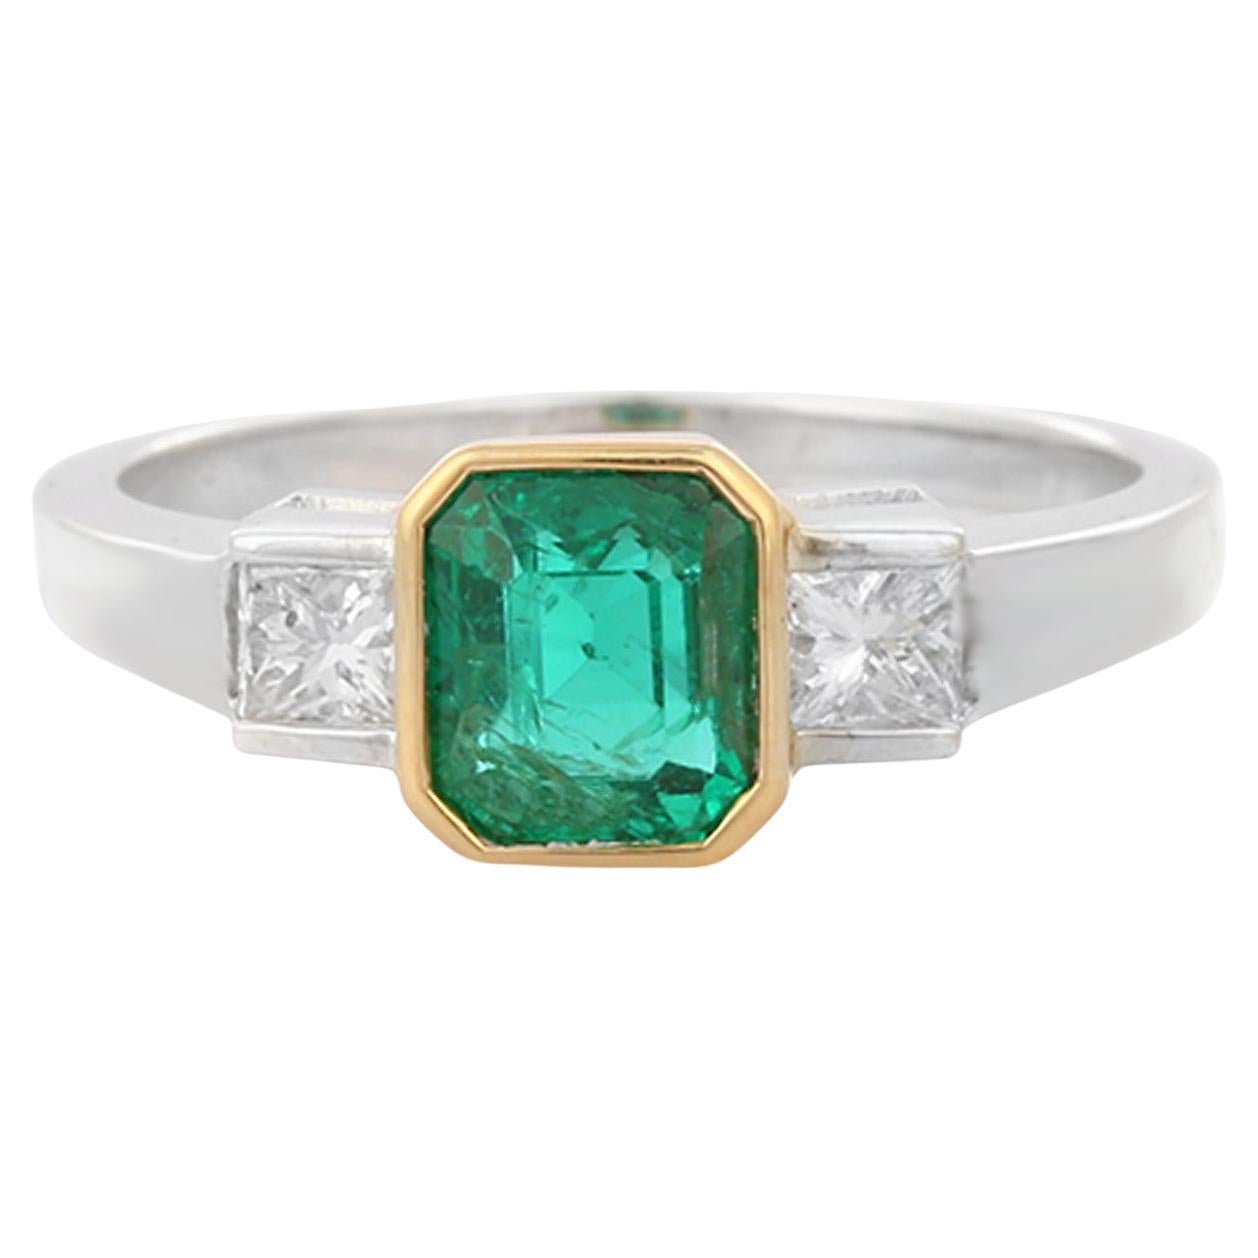 1.61 Carat Octagon Cut Emerald and Diamond Three Stone Ring in 18K White Gold